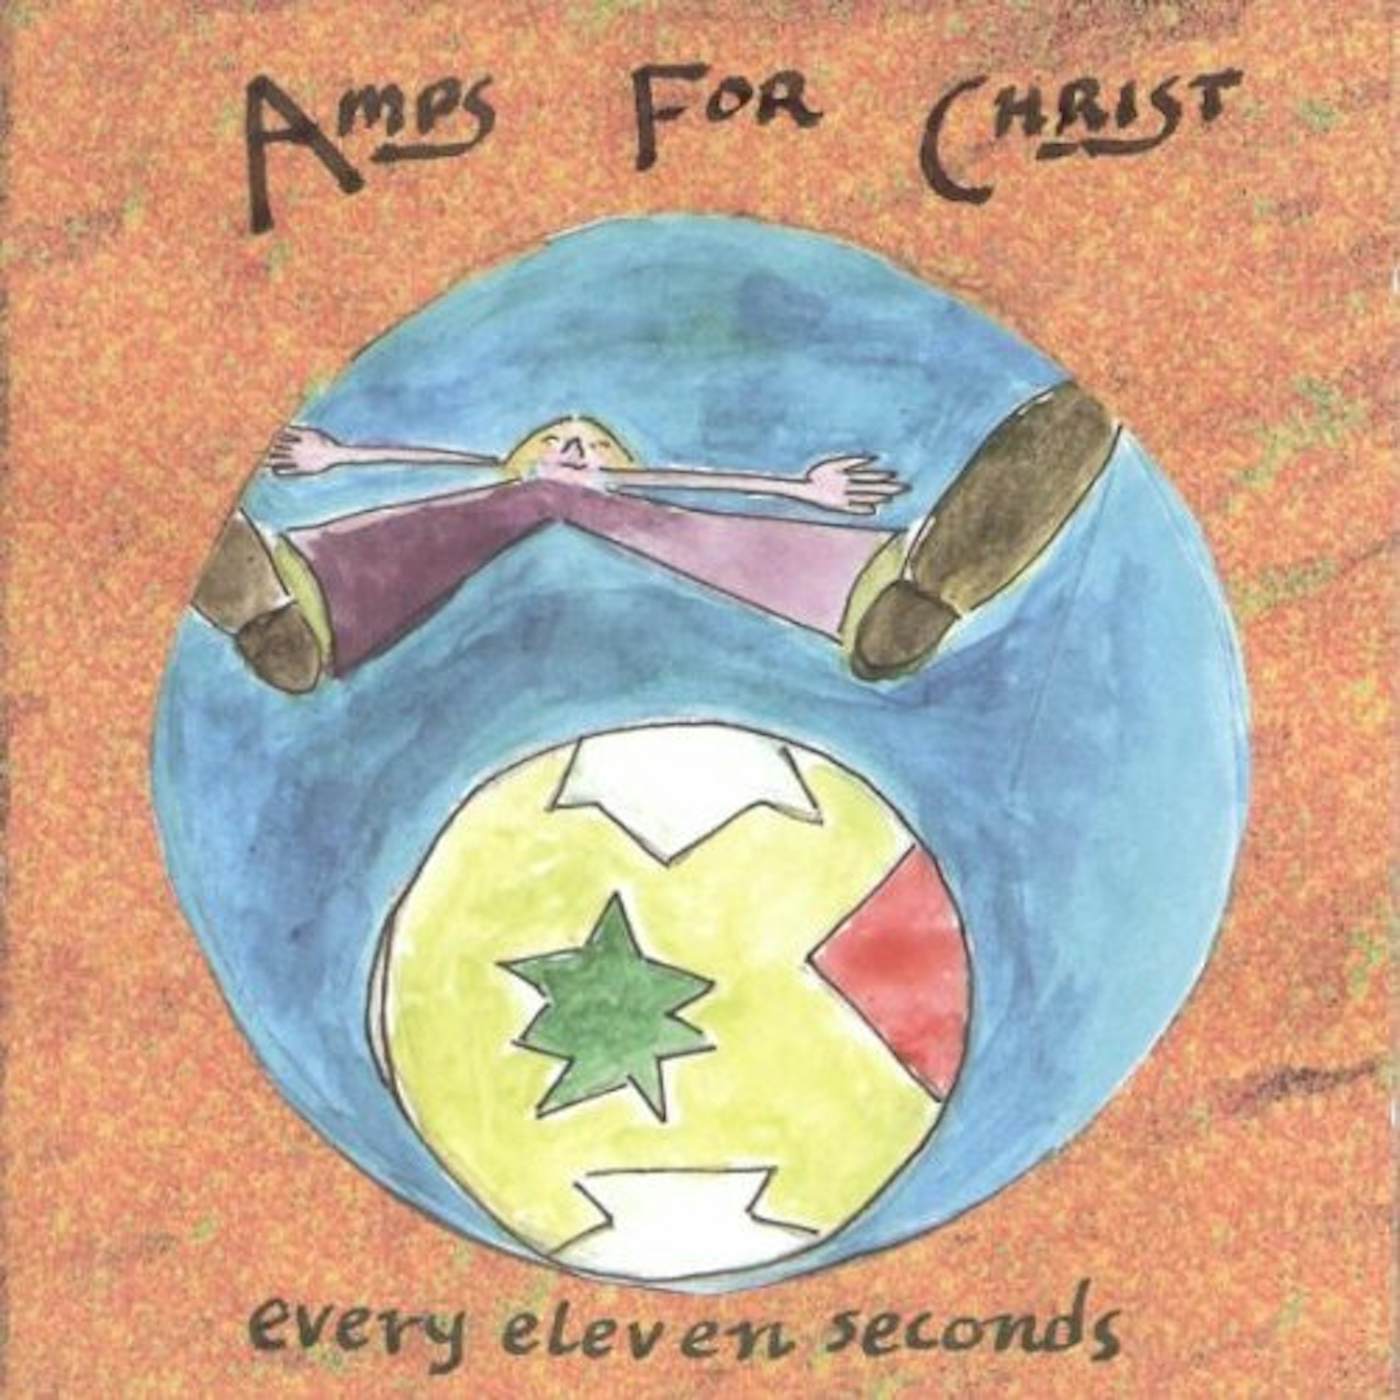 Amps For Christ EVERY ELEVEN SECONDS CD